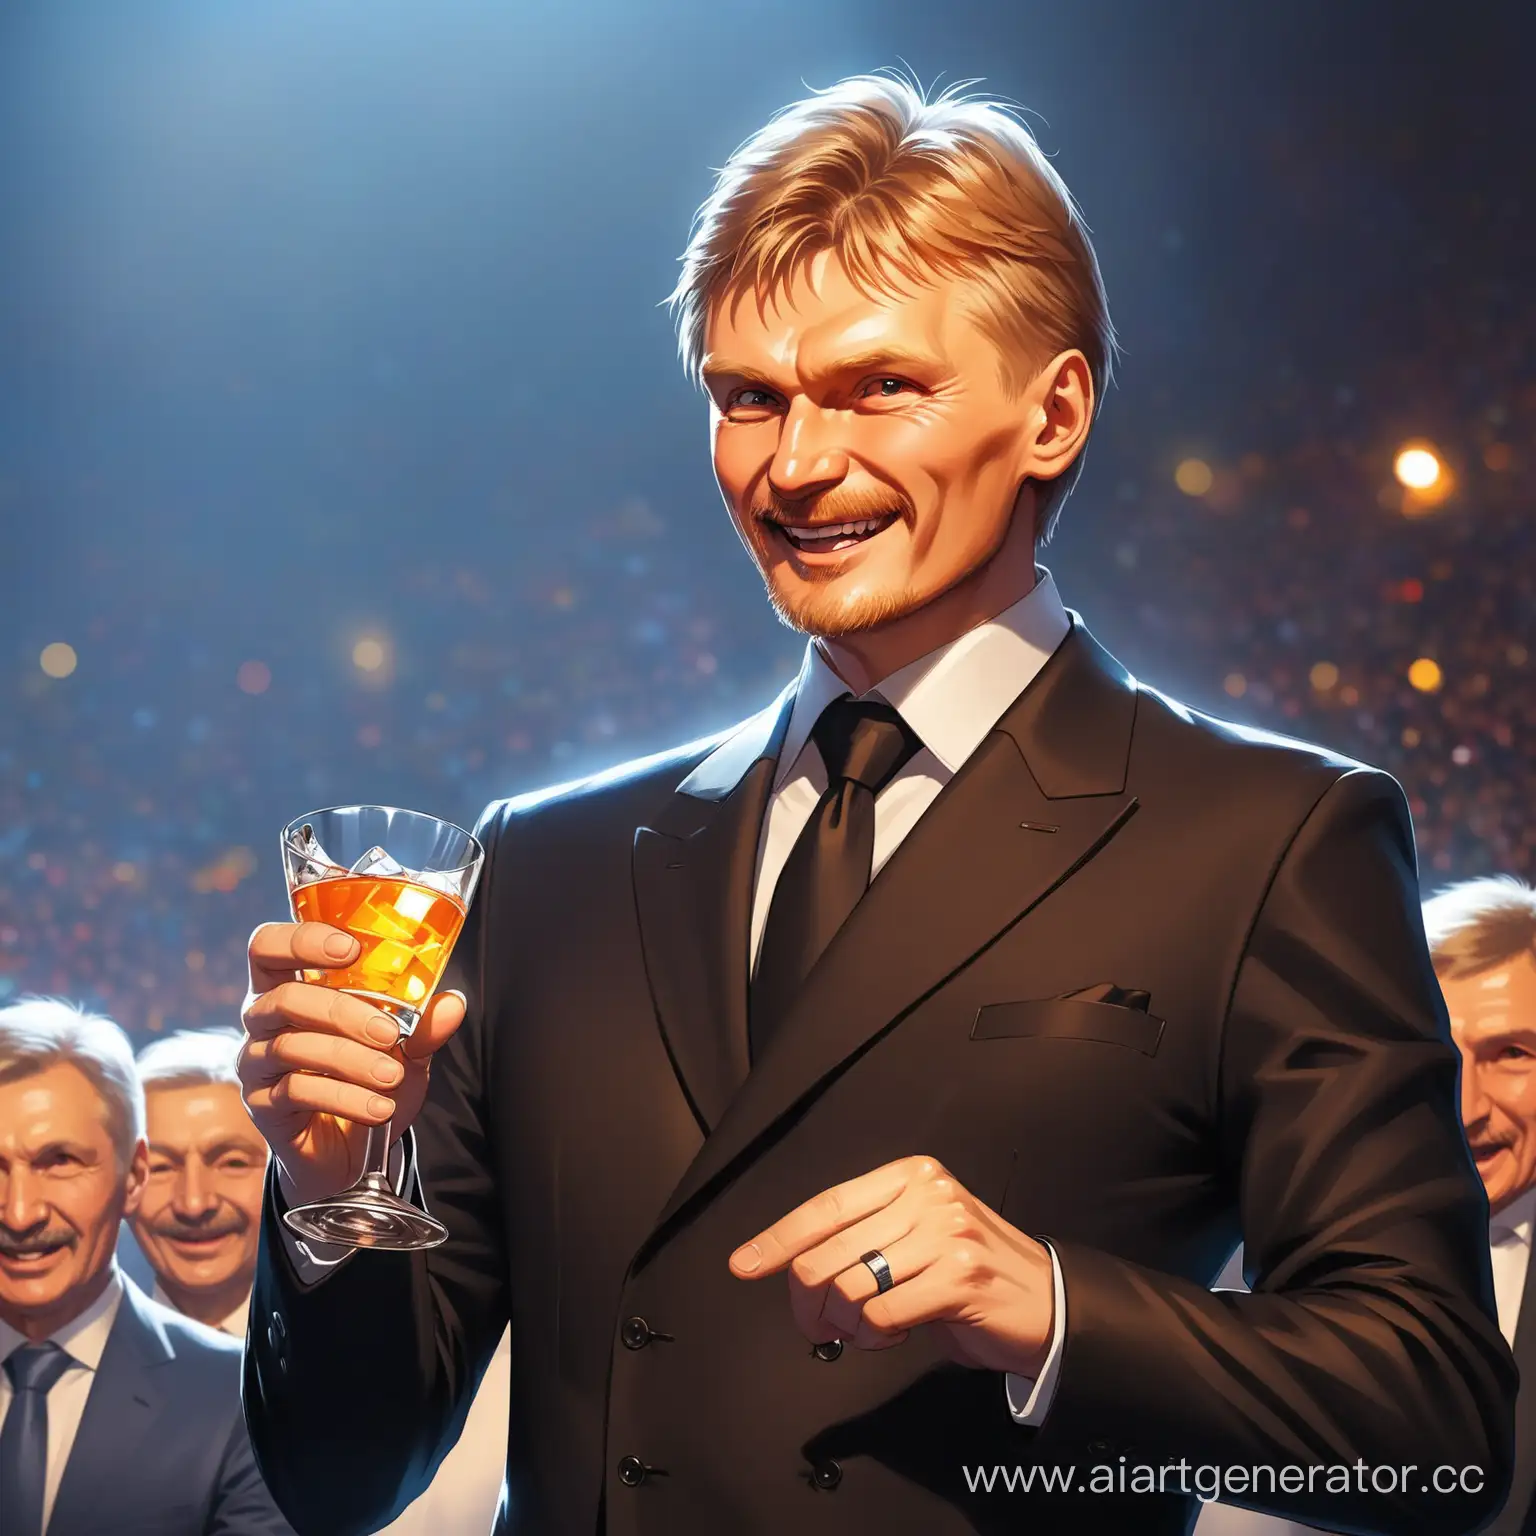 Happy and cheerful Dmitry Peskov addresses the people with a glass of vodka in hand.